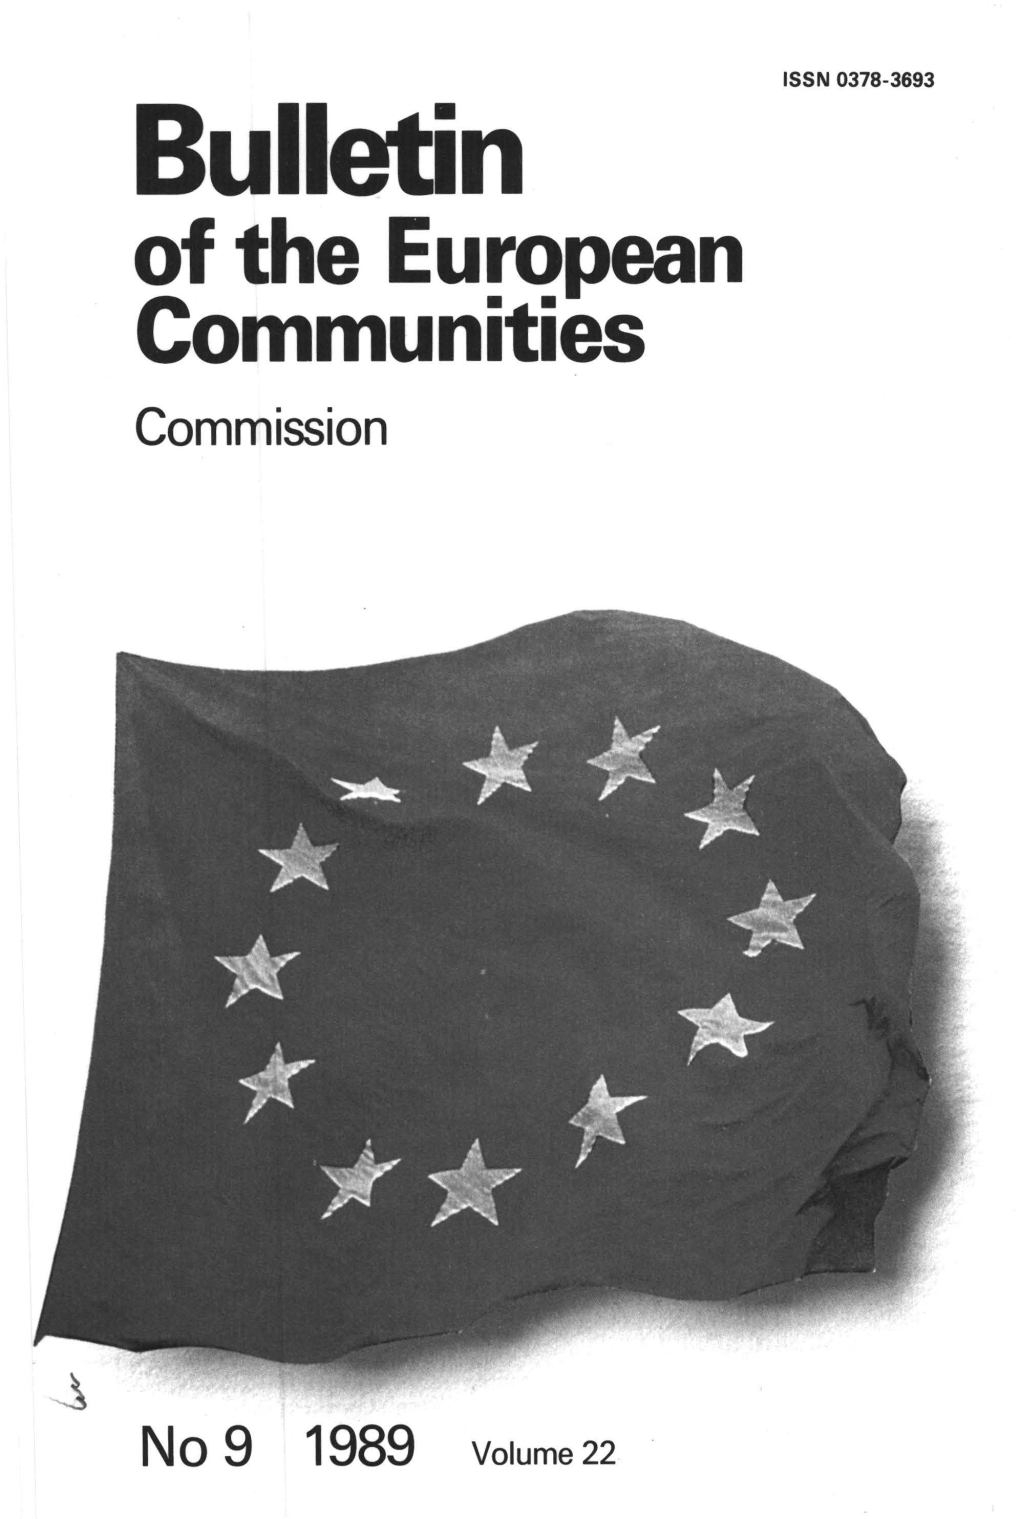 Bulletin of the European Communities Commission